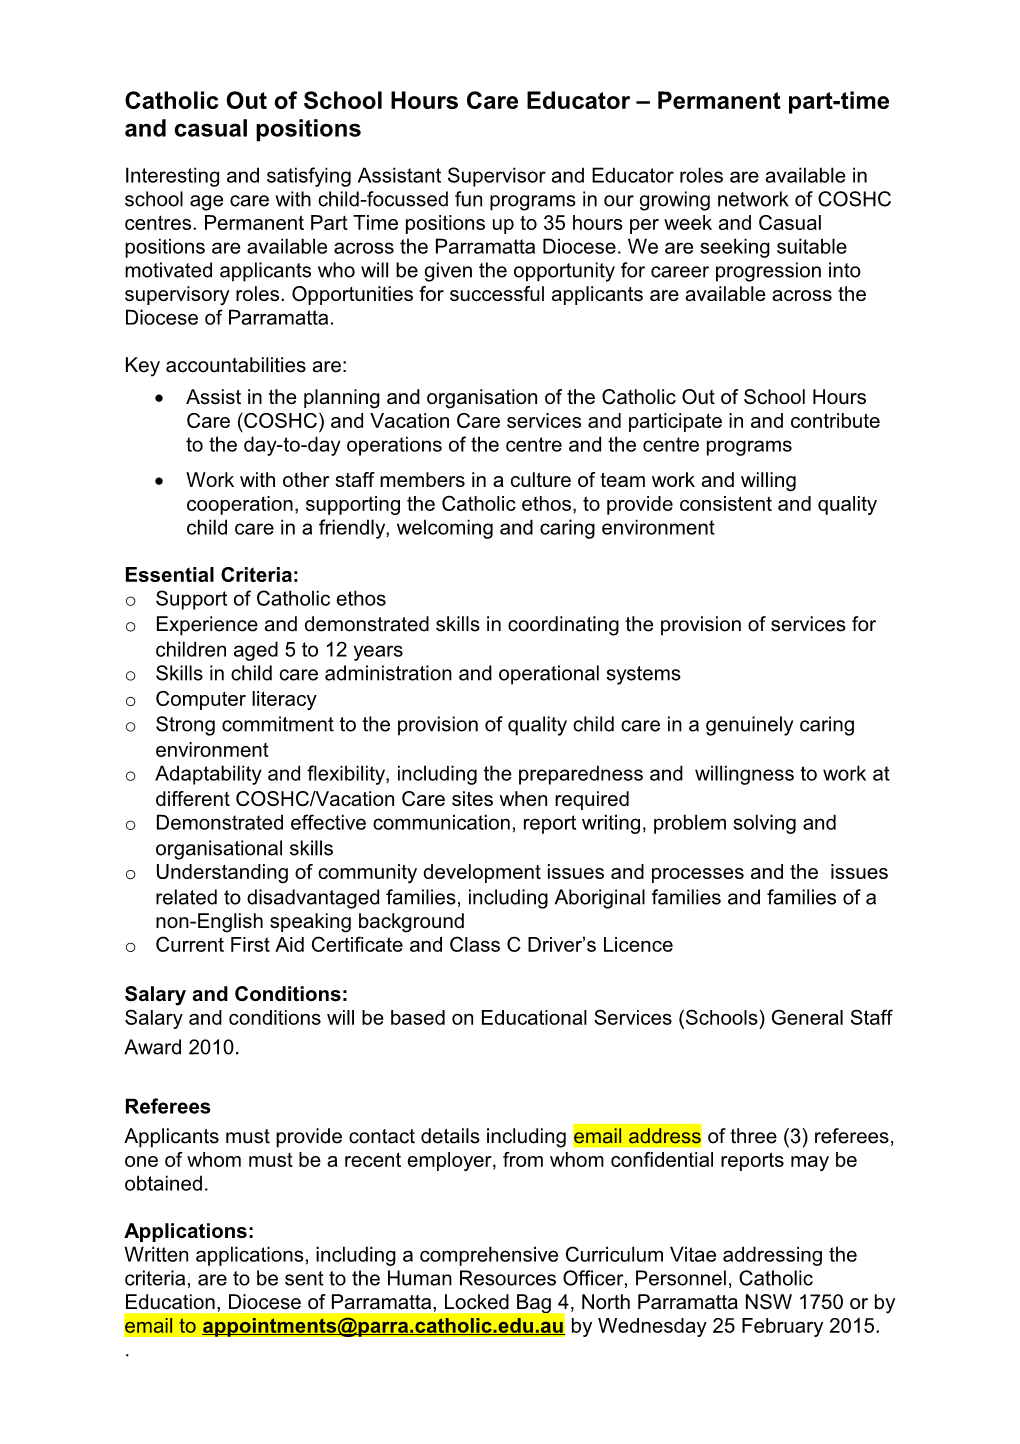 Catholic out of School Hours Care Educator Permanent Part-Time and Casual Positions